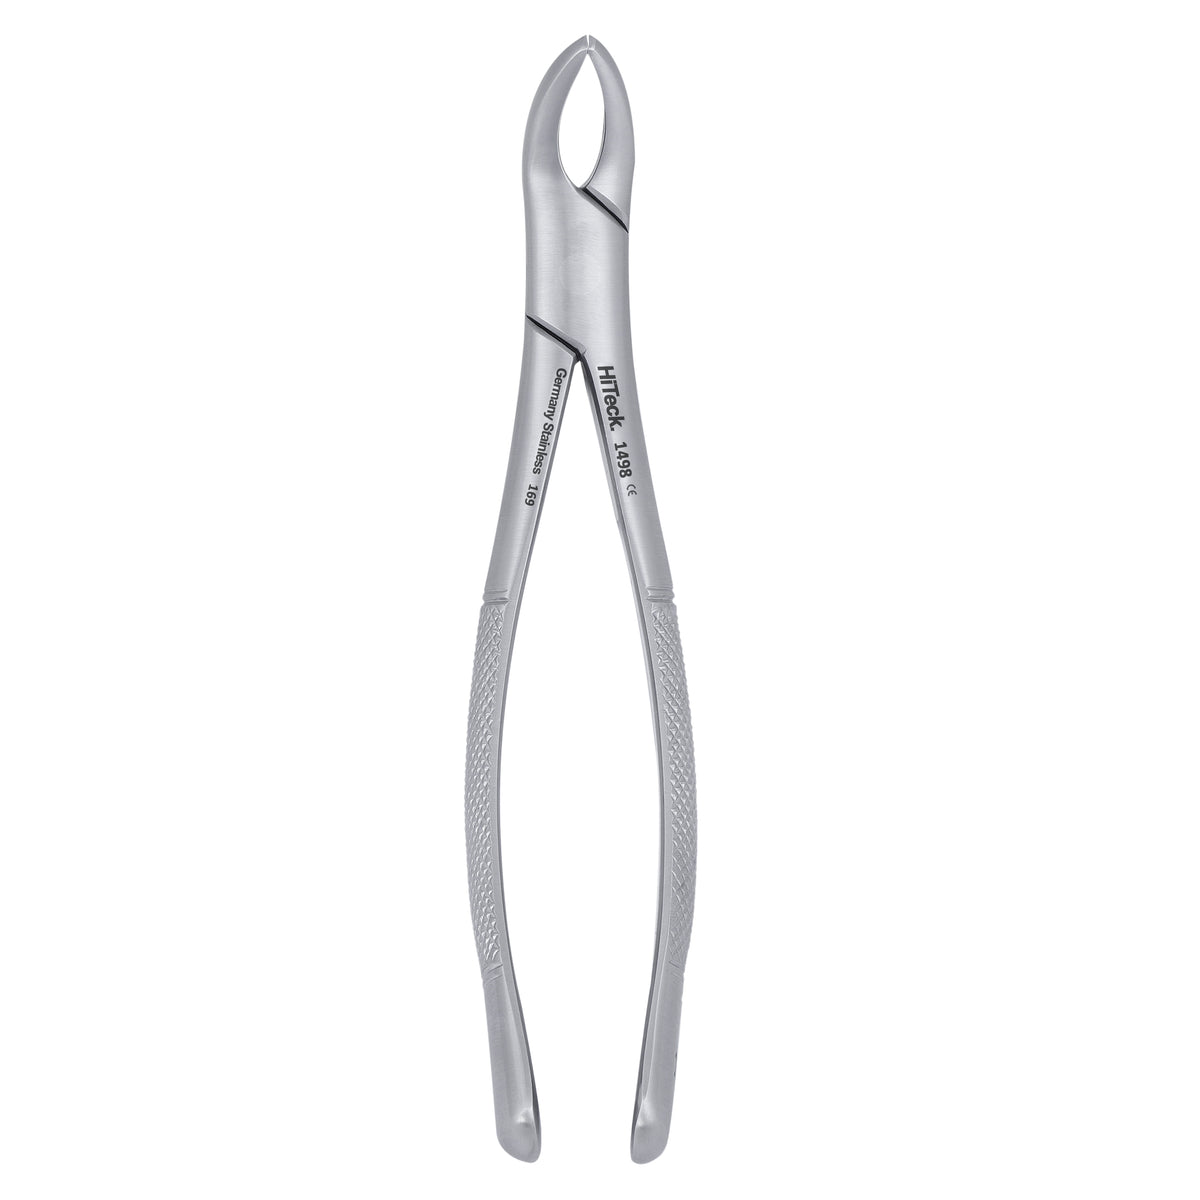 151 Cryer Universal Lower Incisors, Canines & Premolars Extraction Forceps - HiTeck Medical Instruments